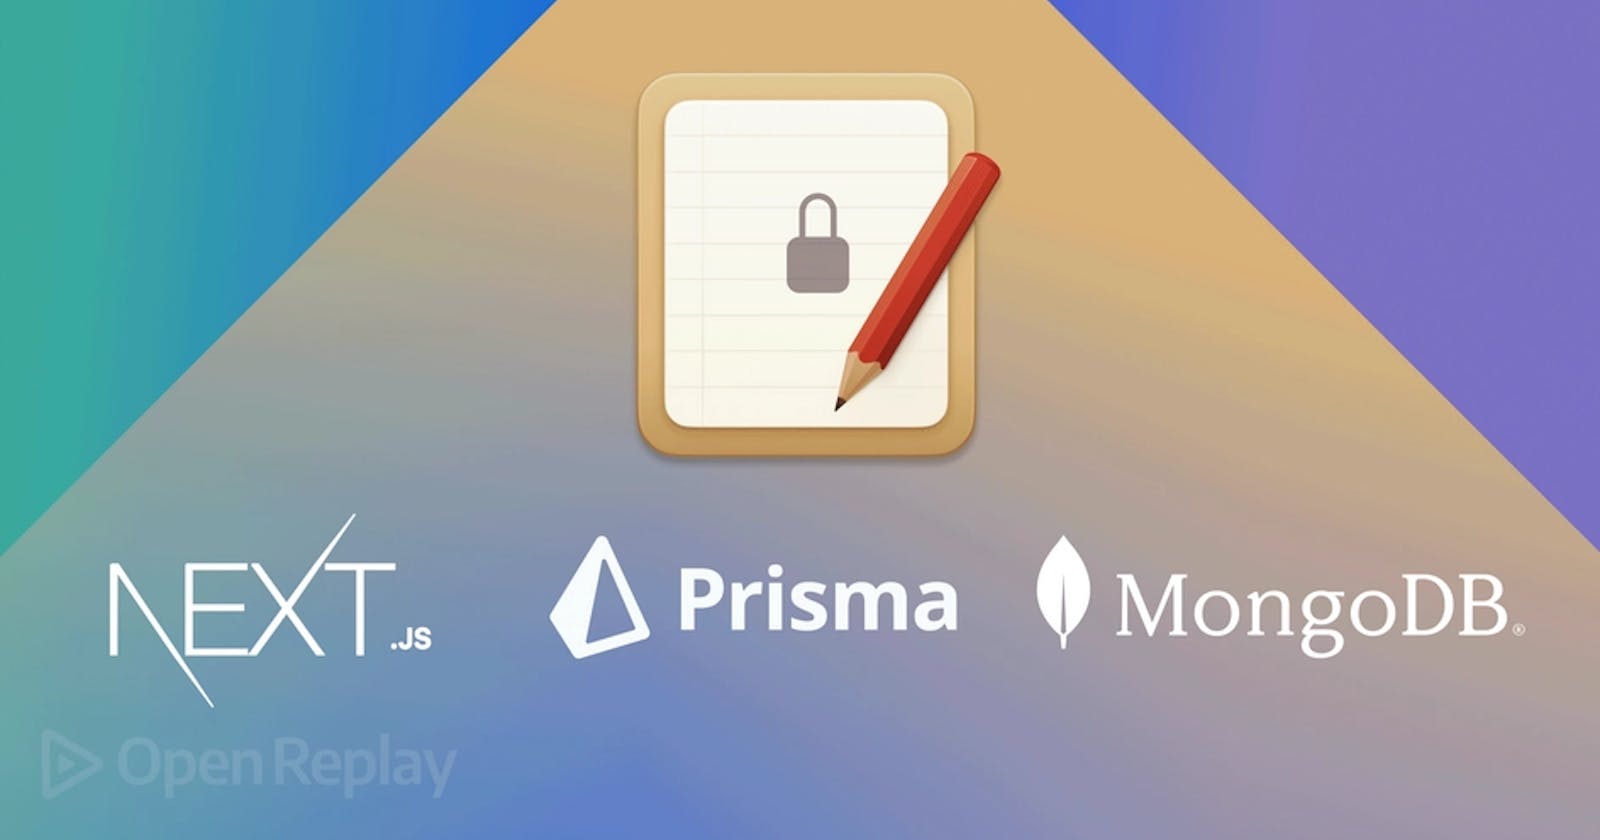 Authentication and DB access with Next, Prisma, and MongoDB